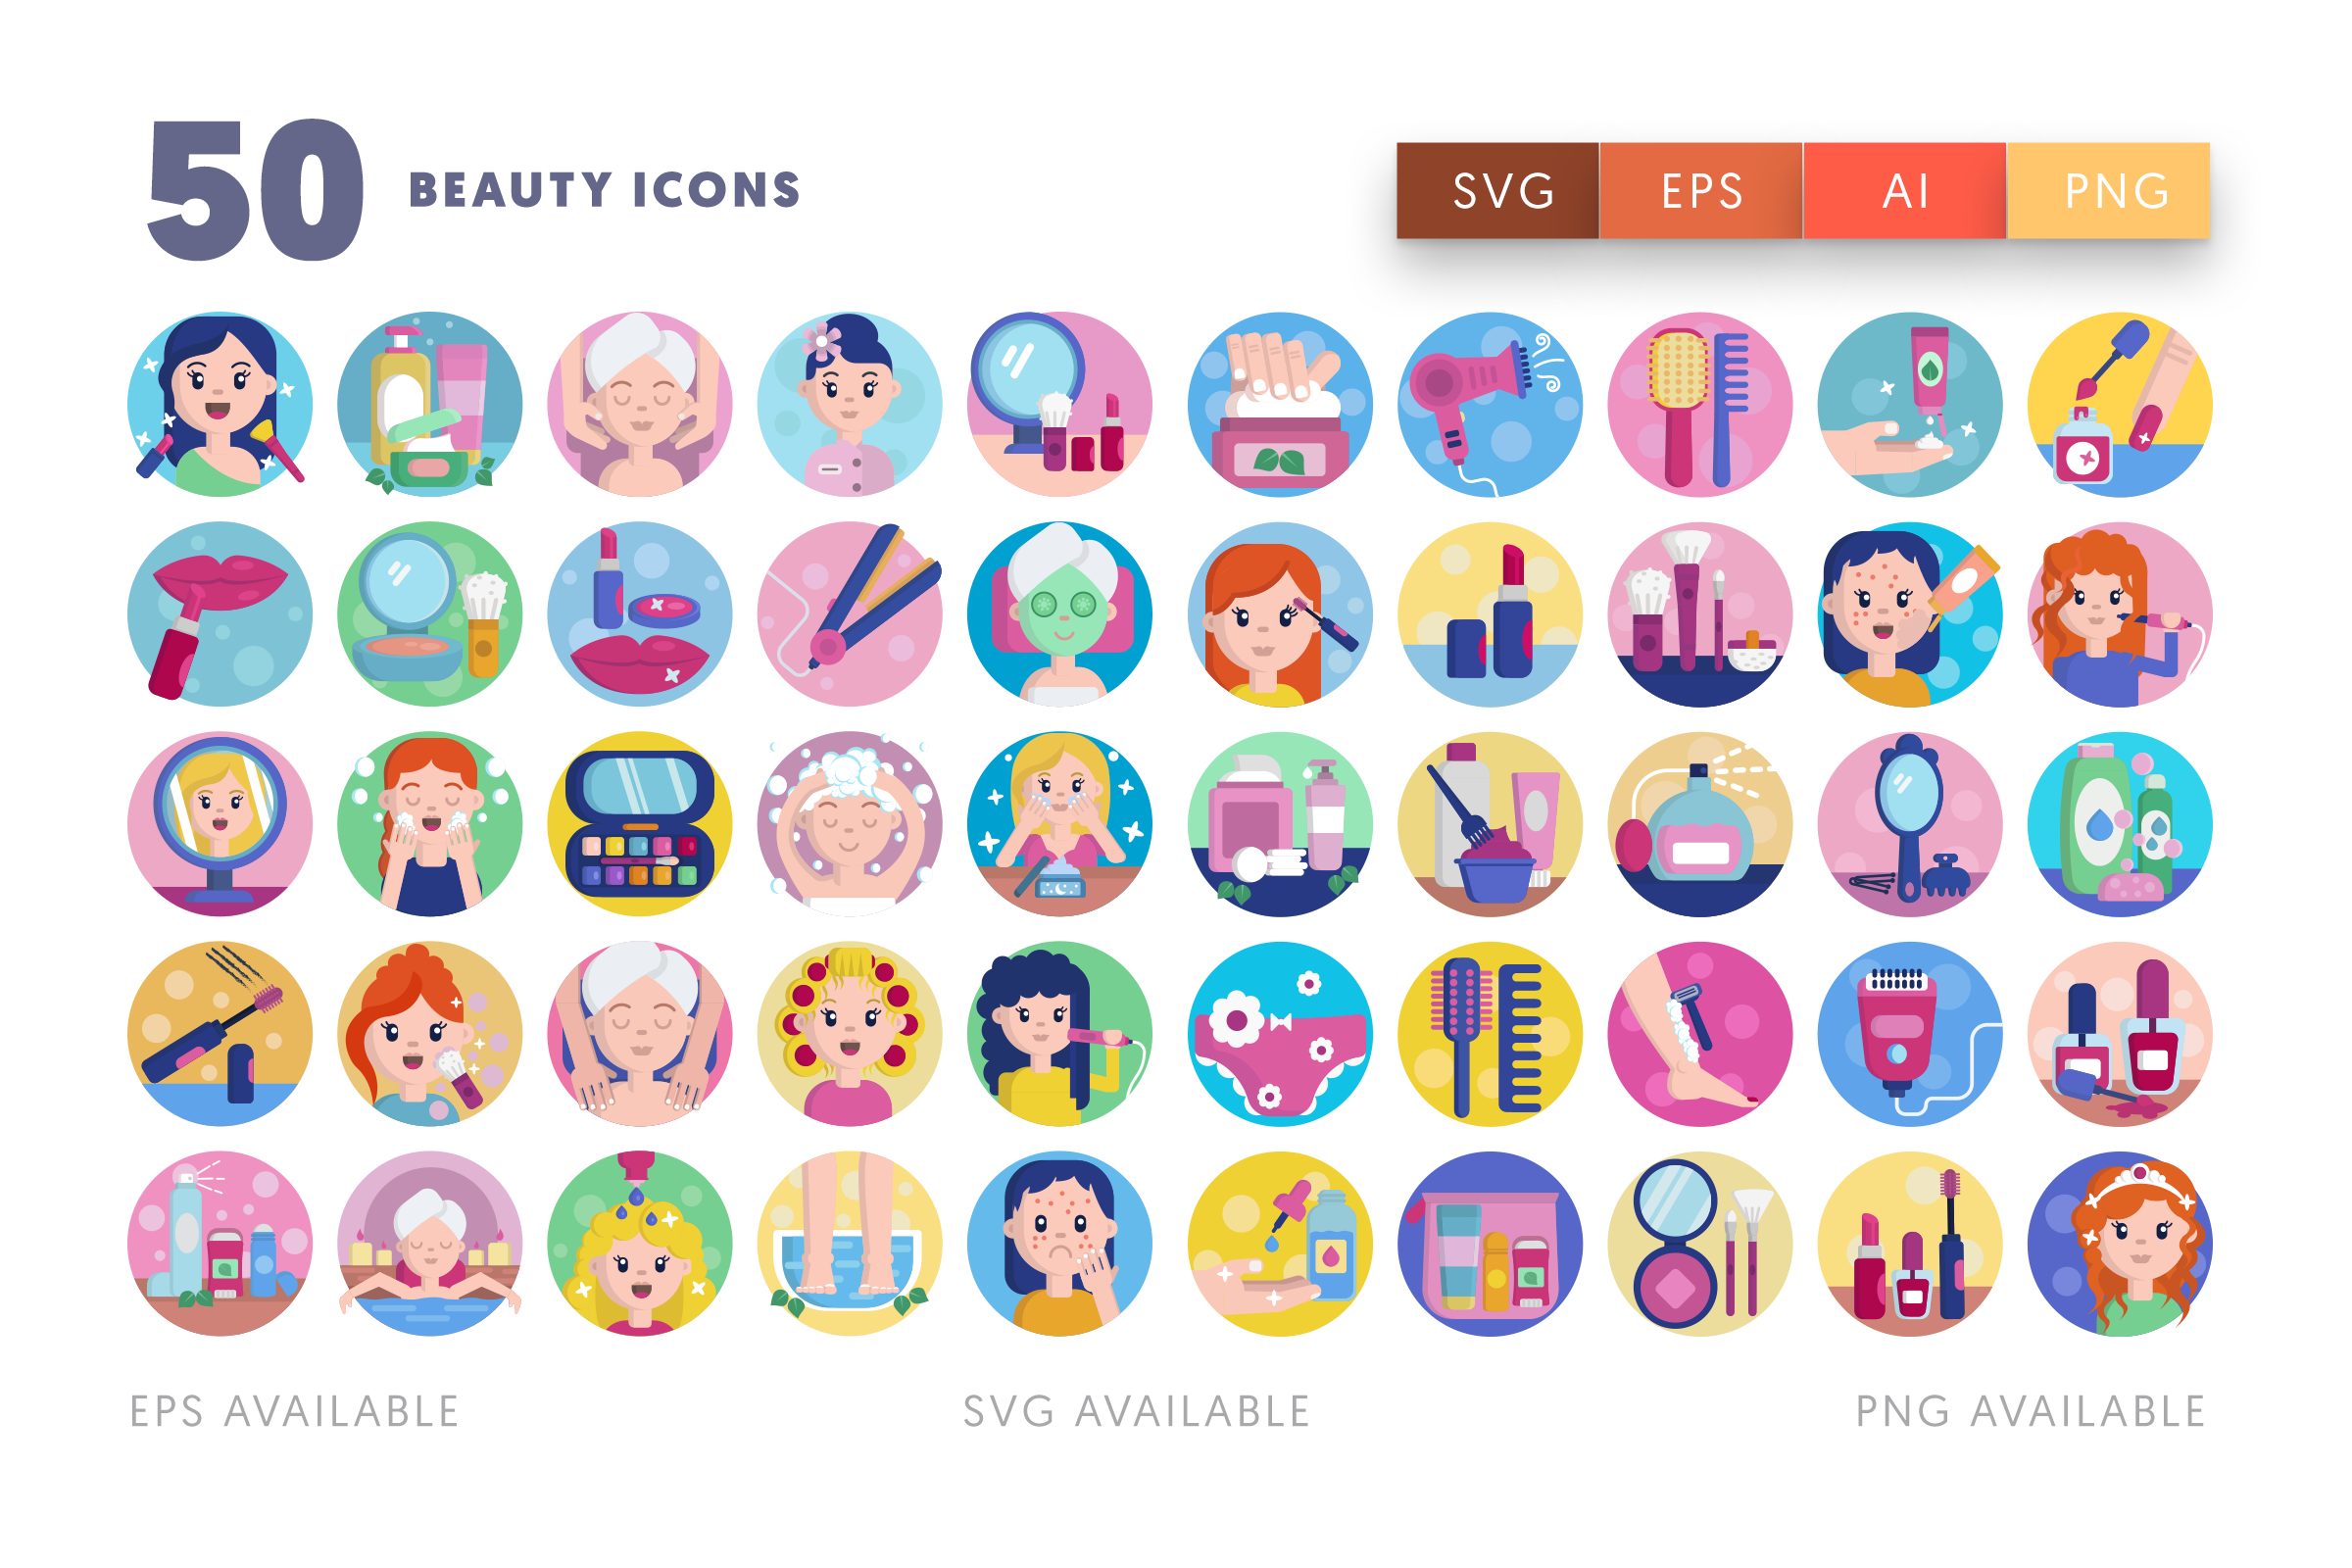 Beauty icons png/svg/eps